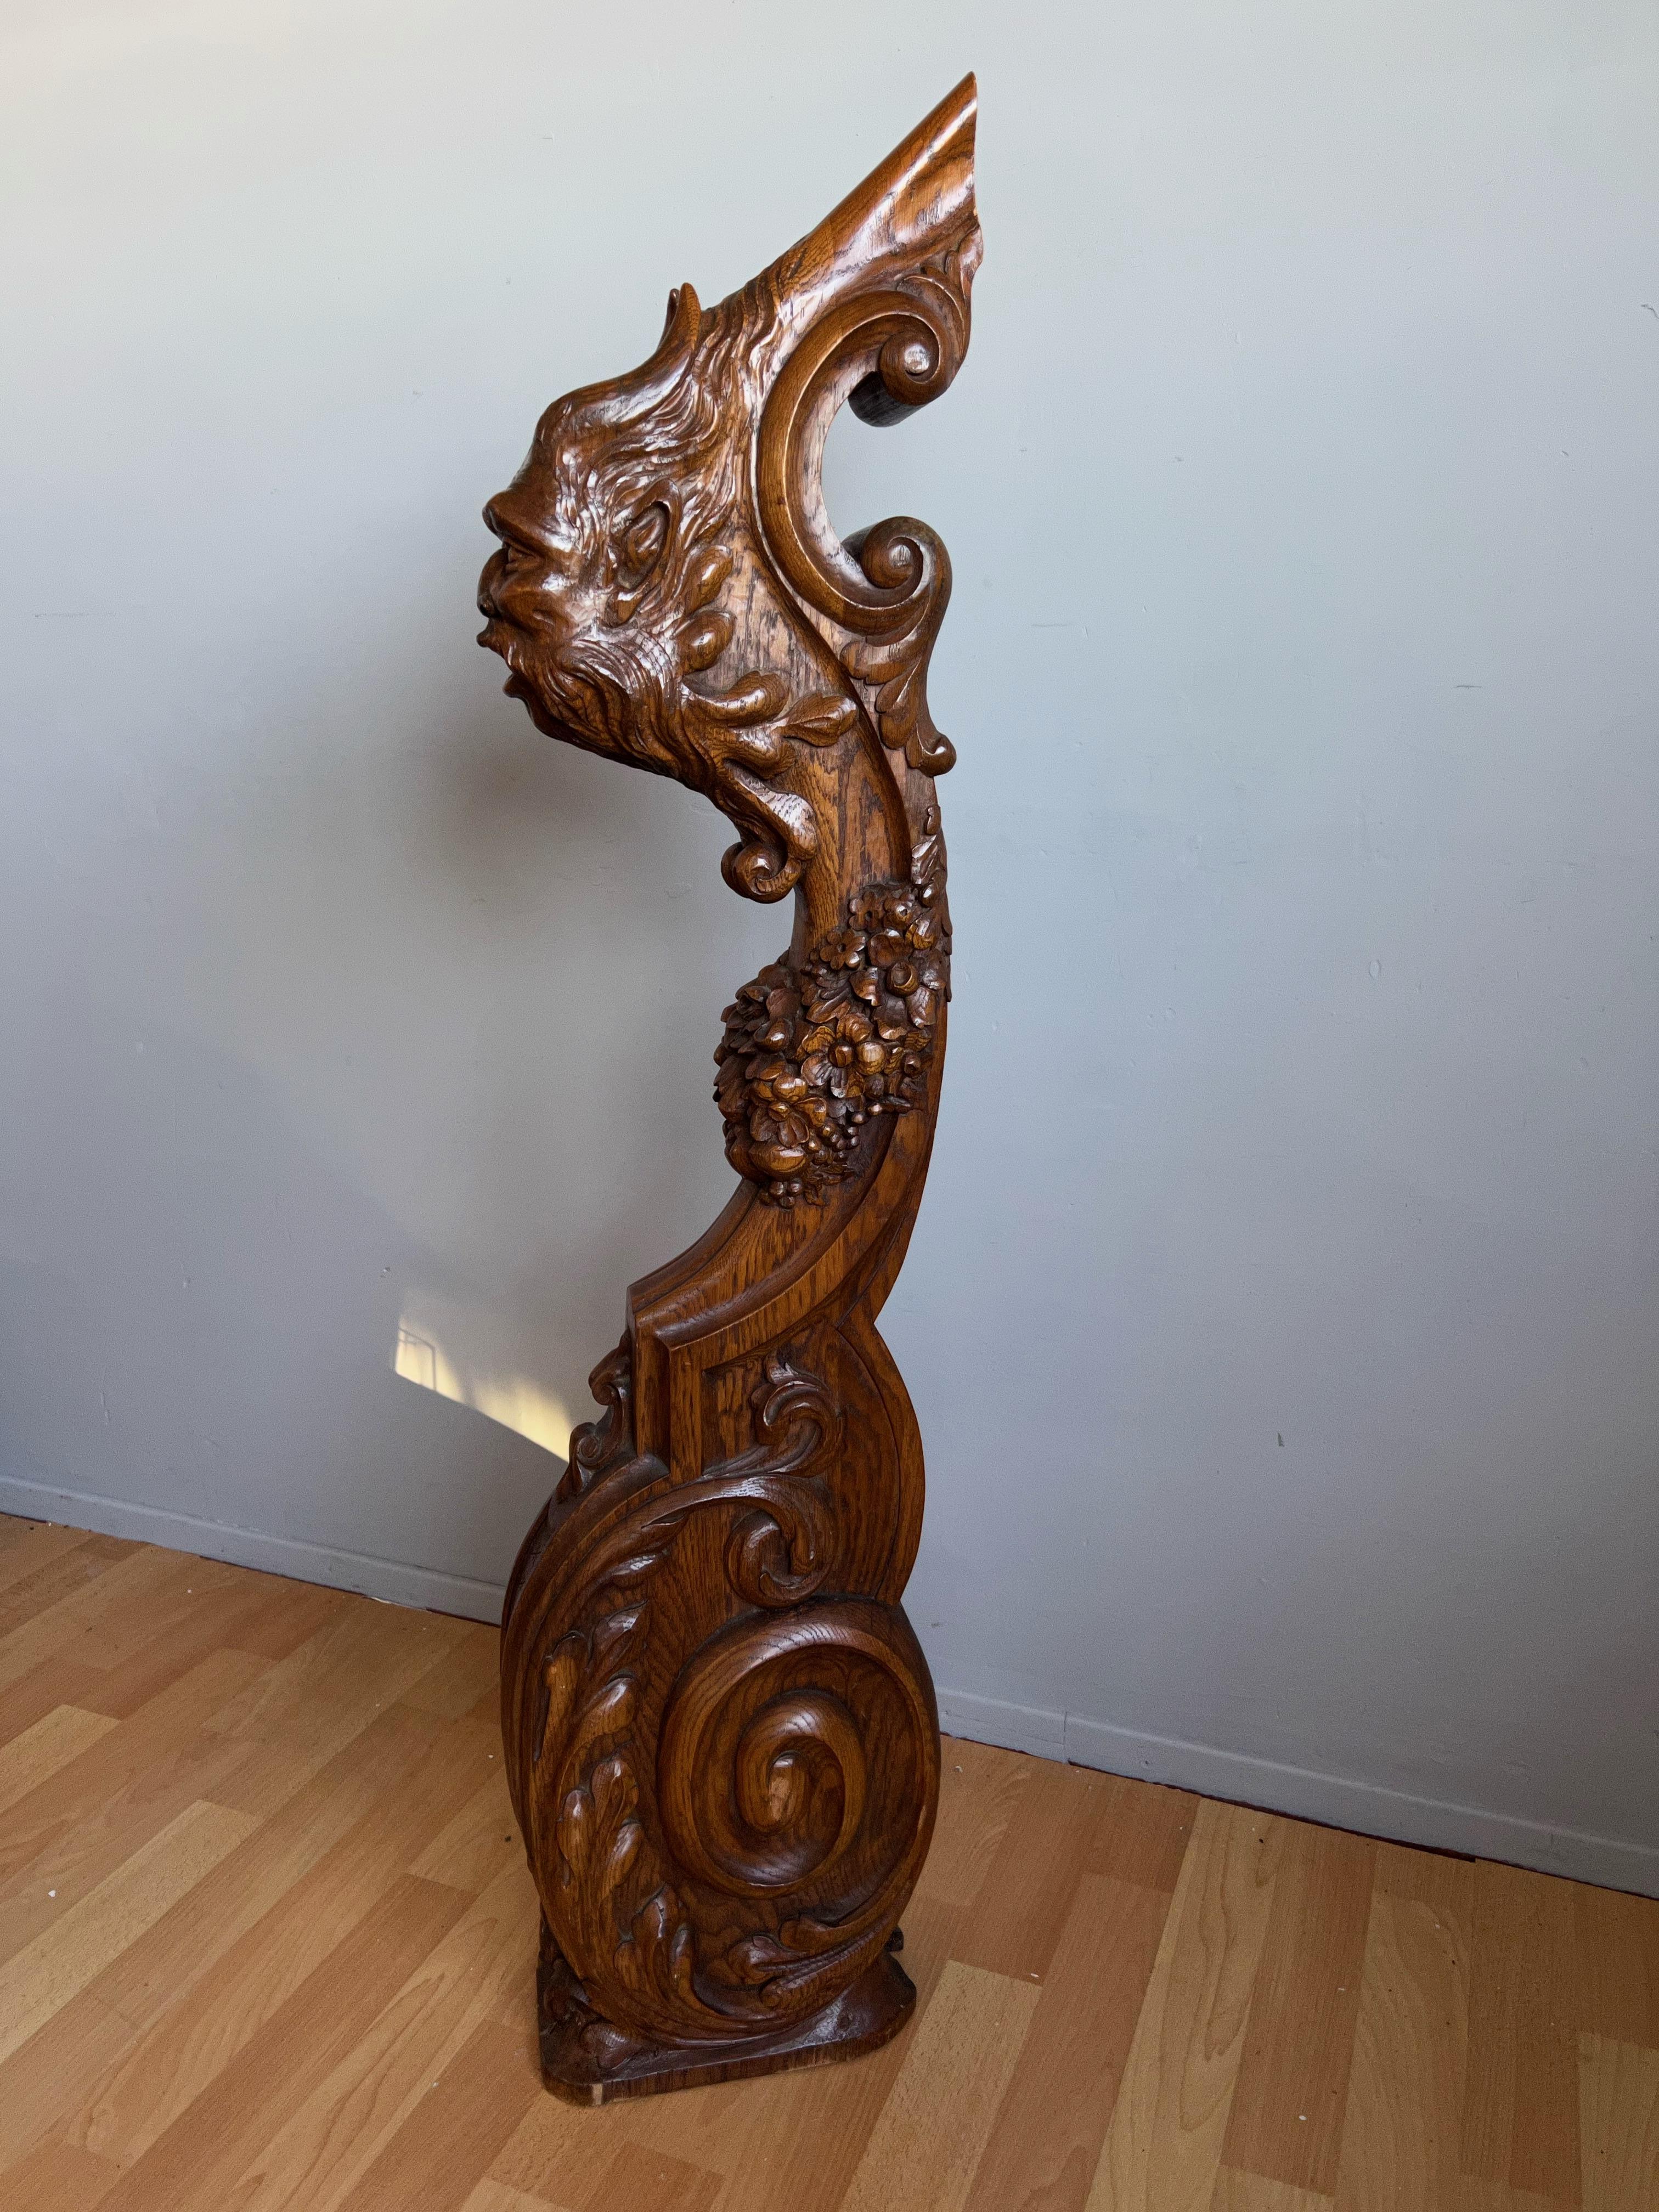 19th Century Antique Hand Carved Oak Stair Rail Newel Post with Ogre Sculpture & Many Flowers